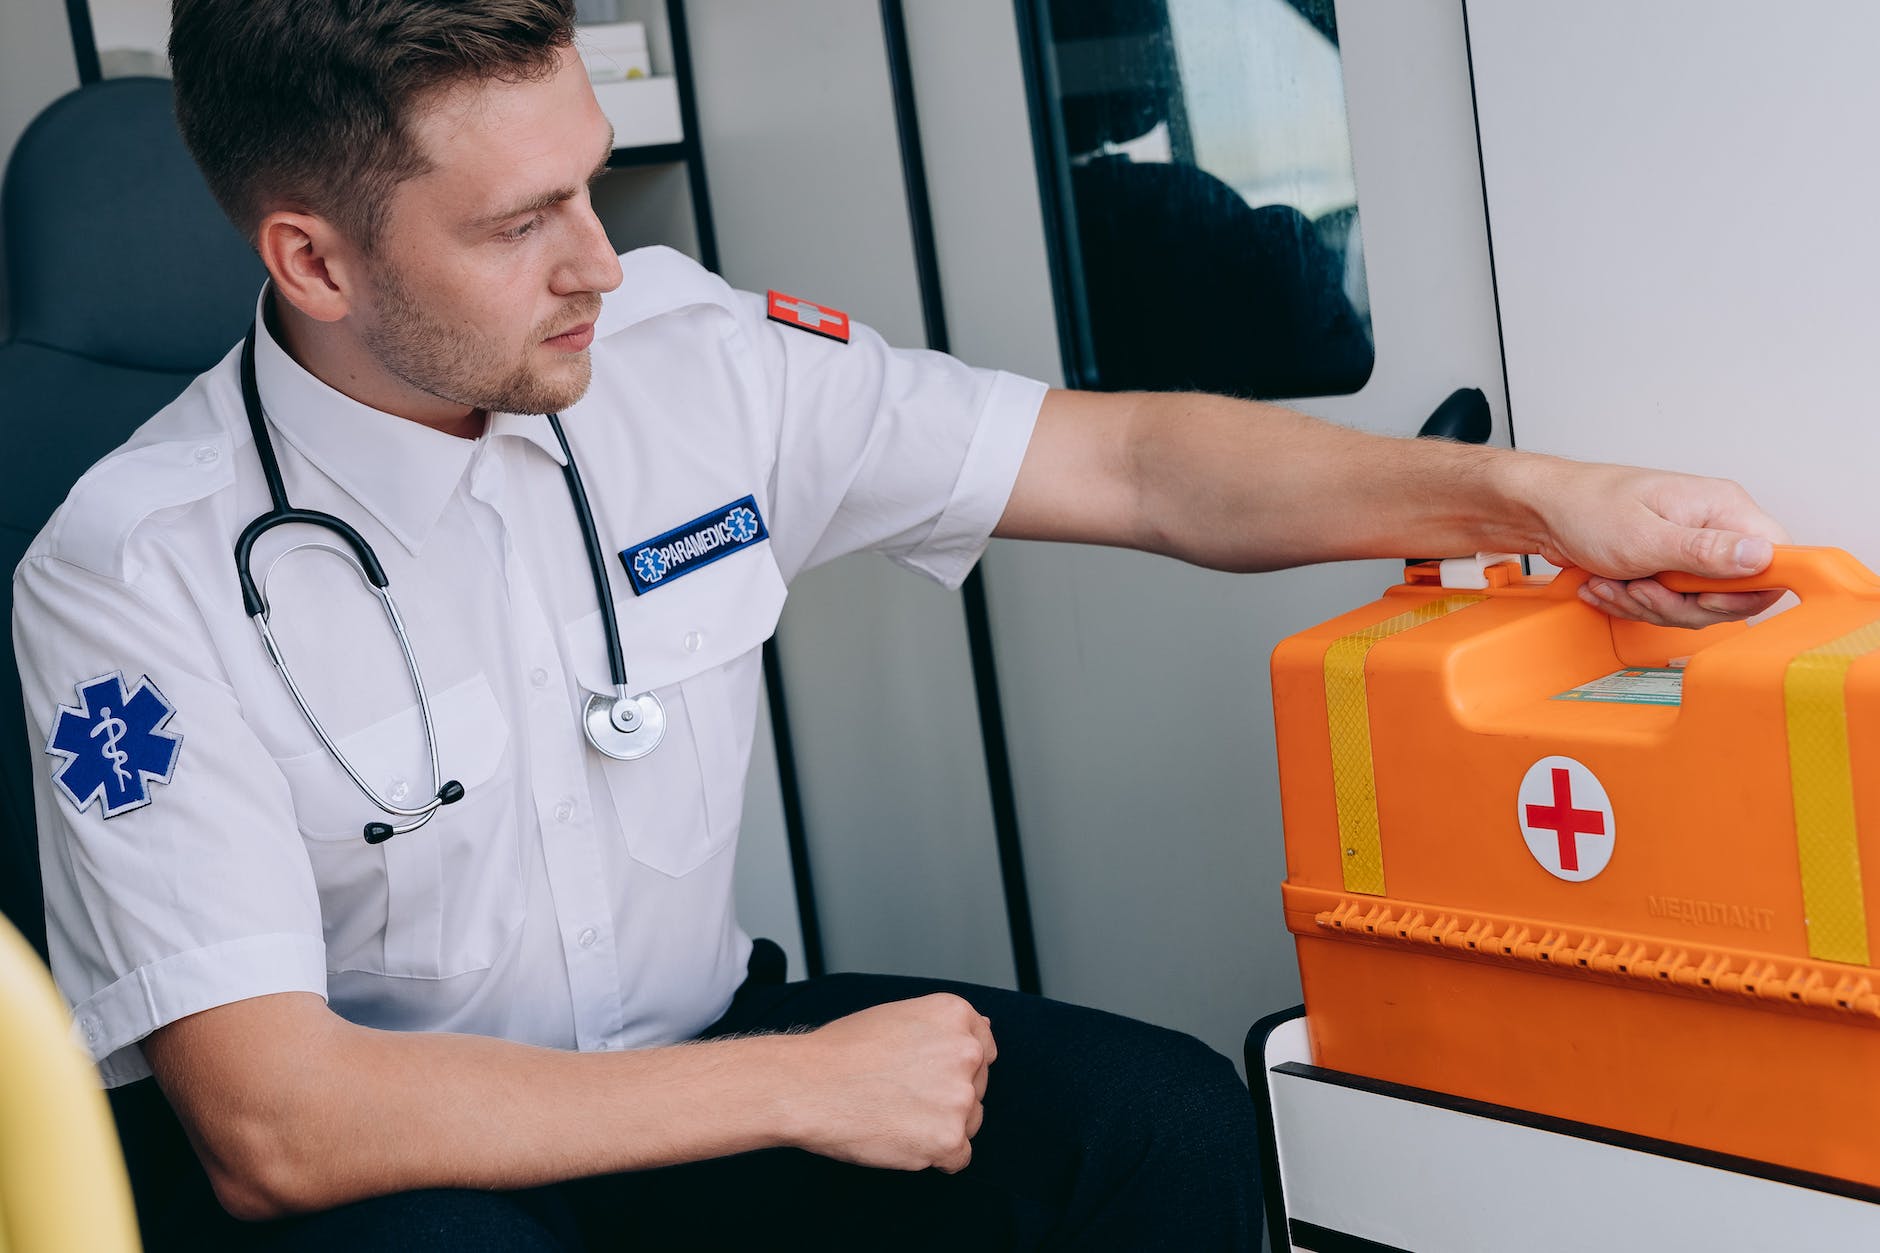 First Aid: Kits, CPR, and Emergency Response